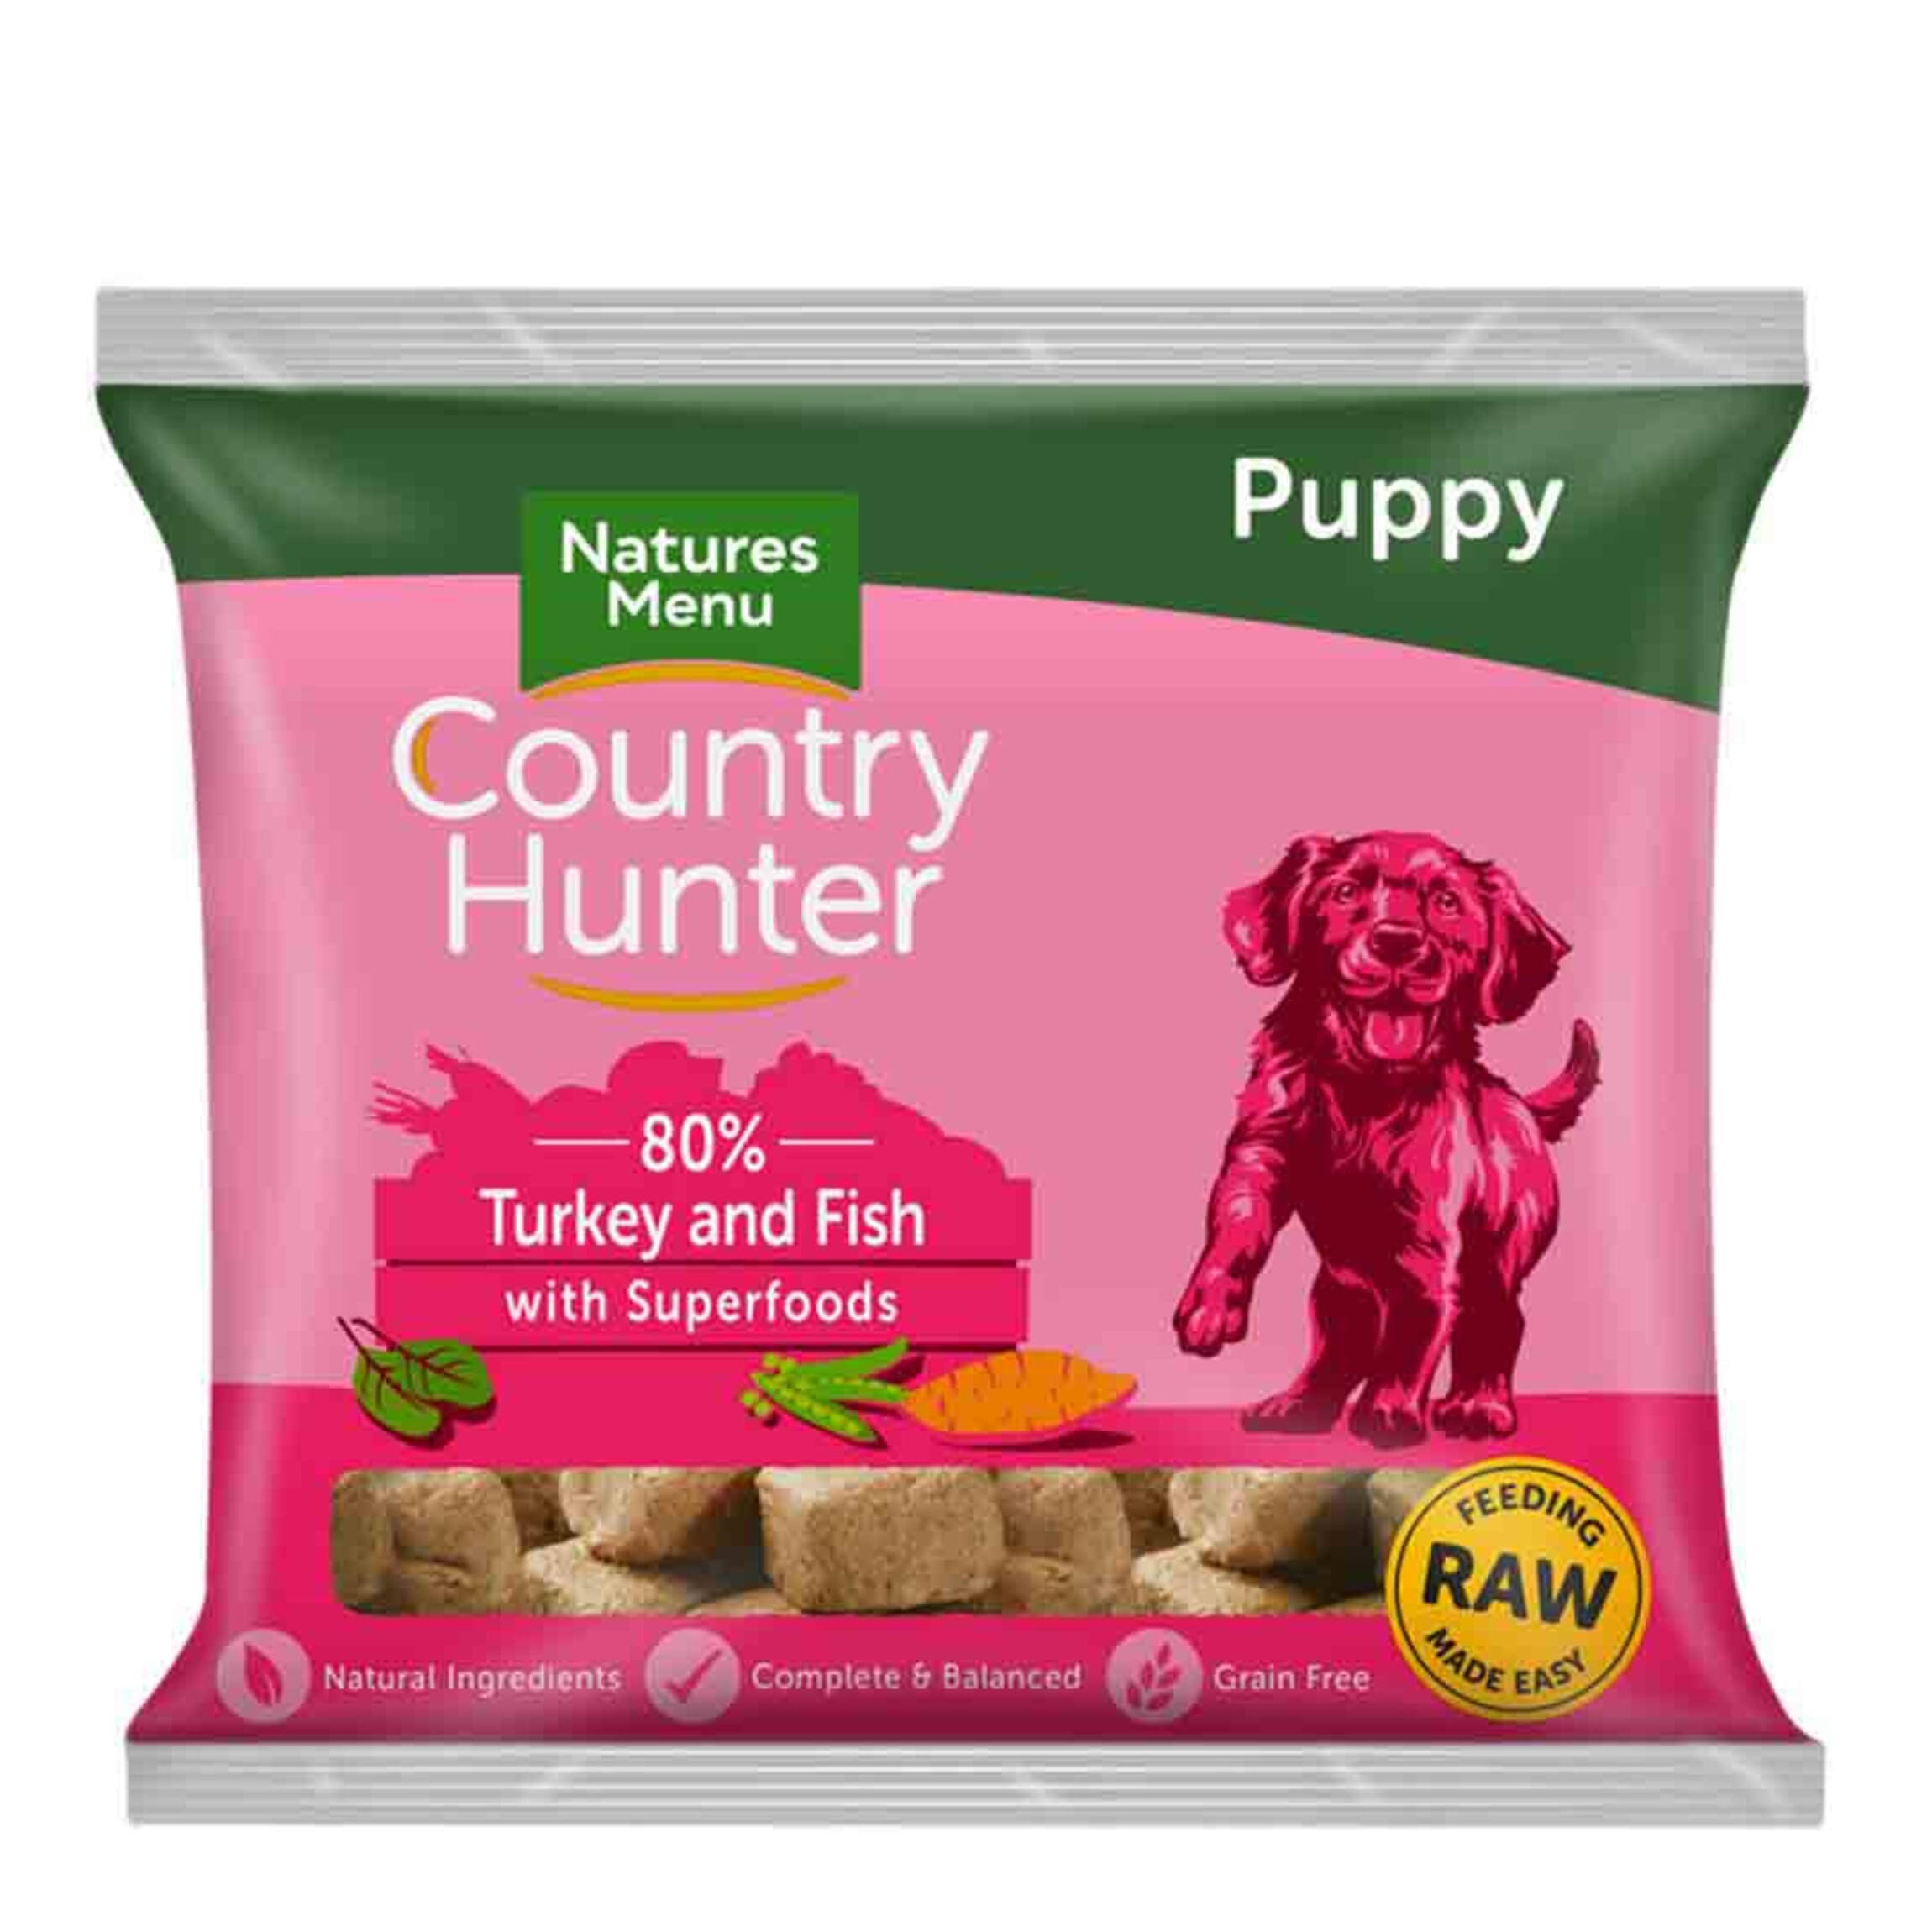 Natures Menu Country Hunter Puppy Nuggets - 1kg